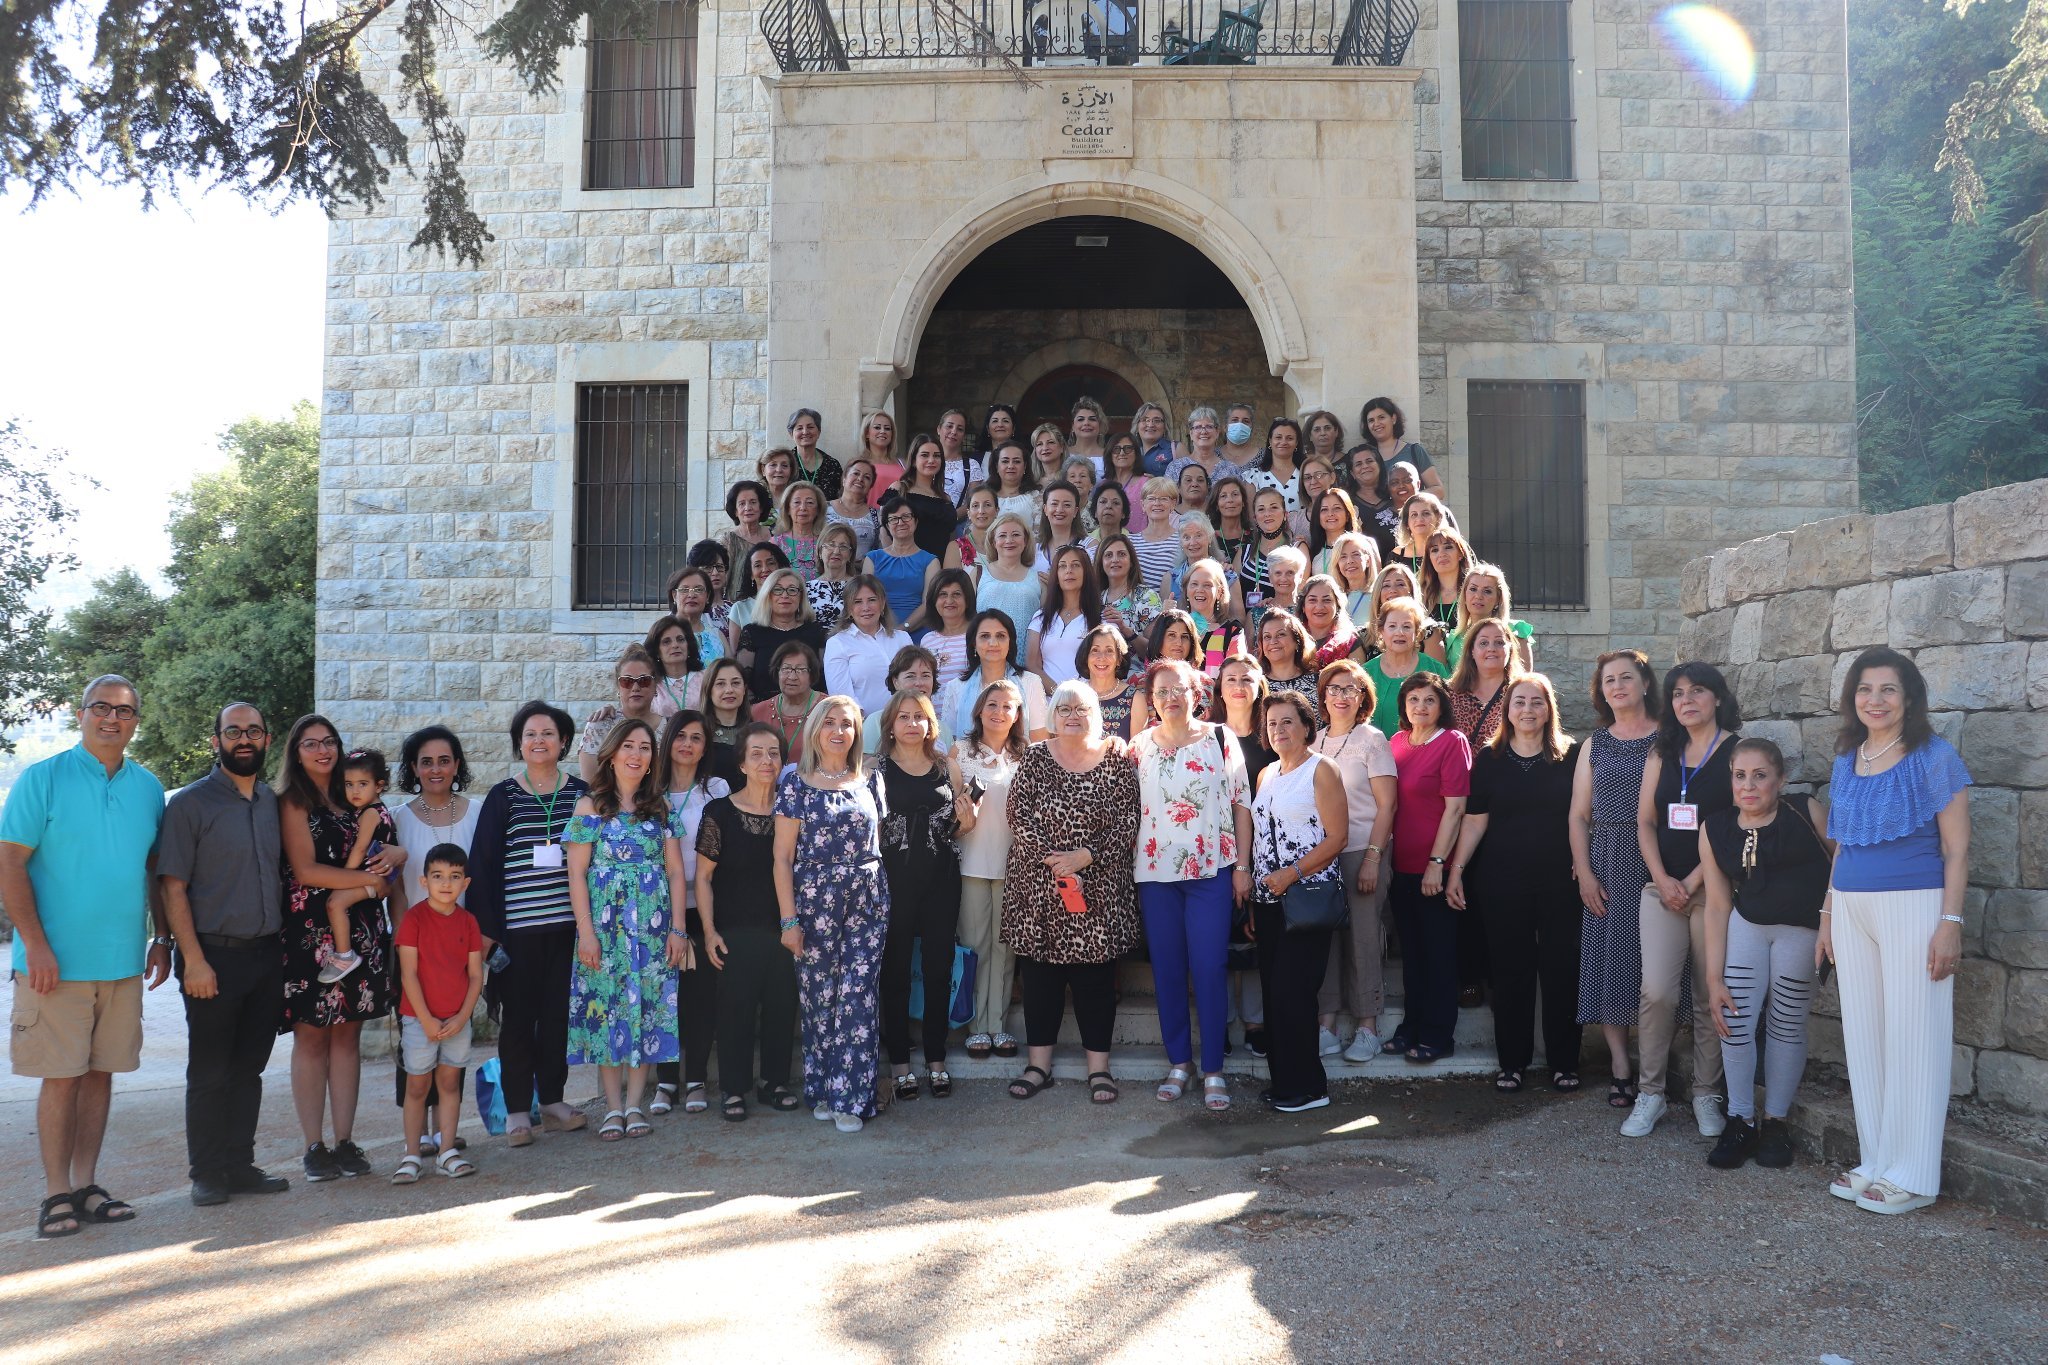 Conference women and leaders gathered on the steps of the Cedars building at Dhour Chouier